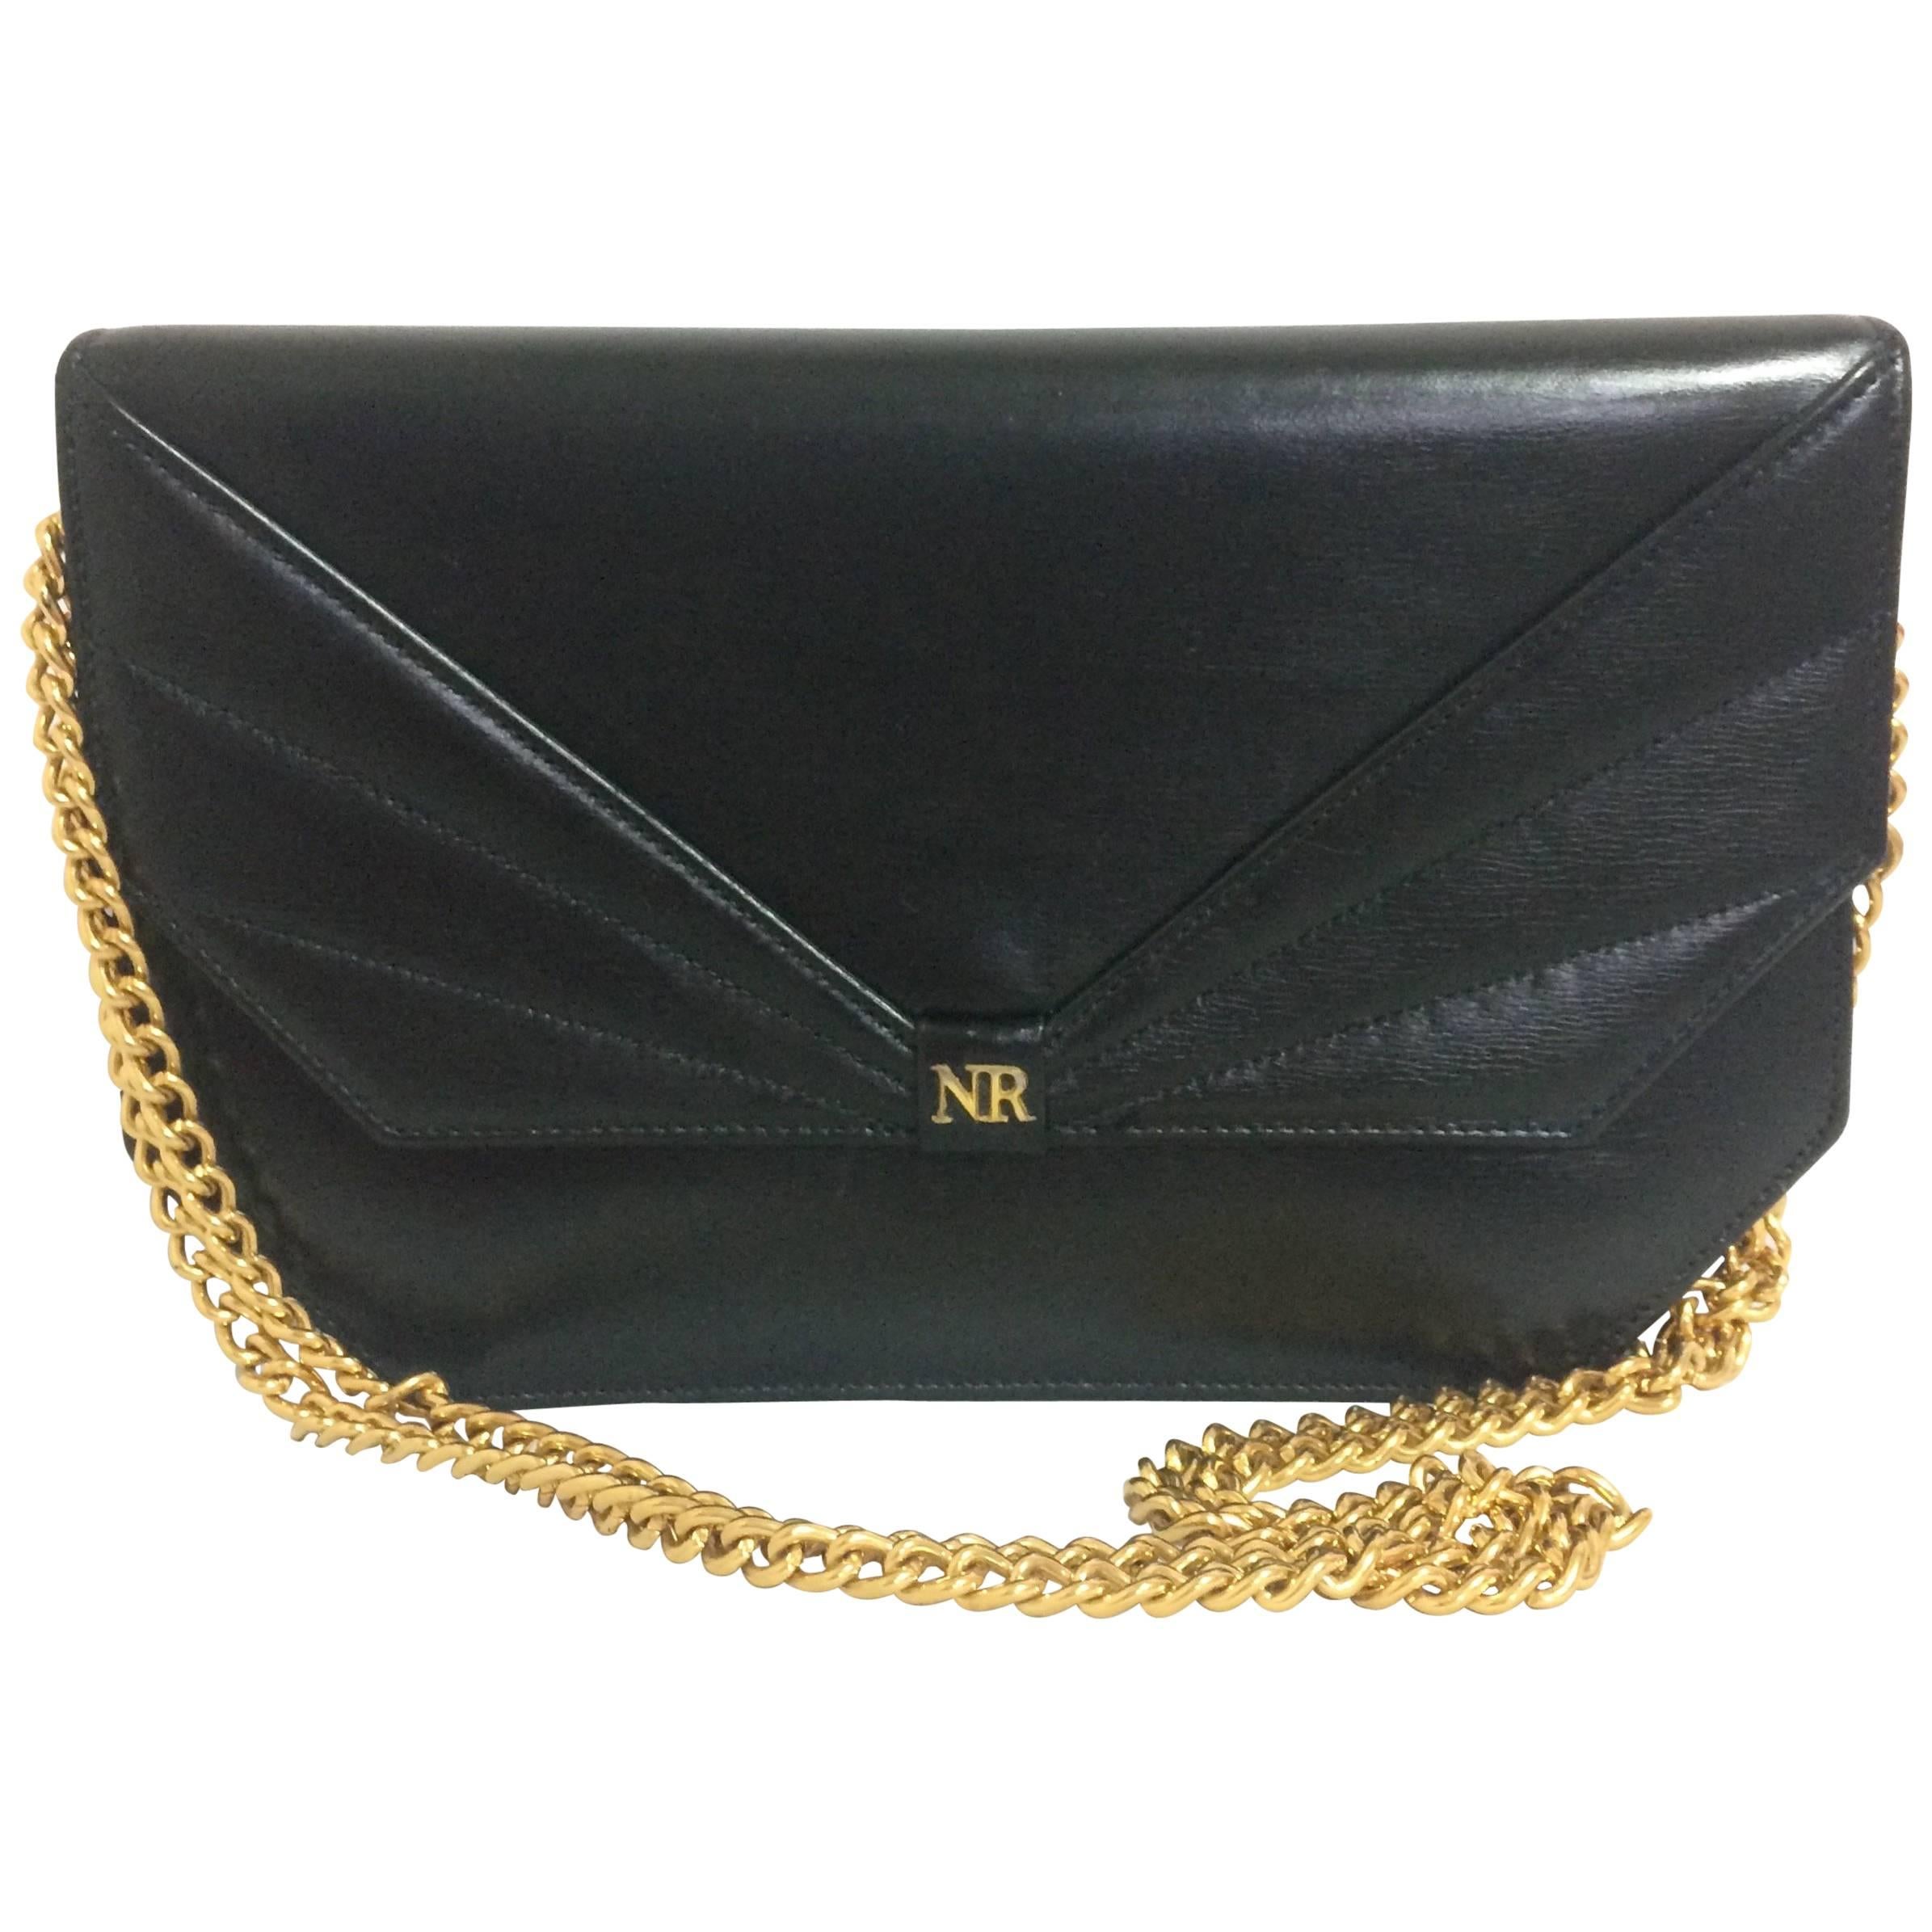 Vintage Nina Ricci black leather chain clutch shoulder bag with a bow stitch For Sale